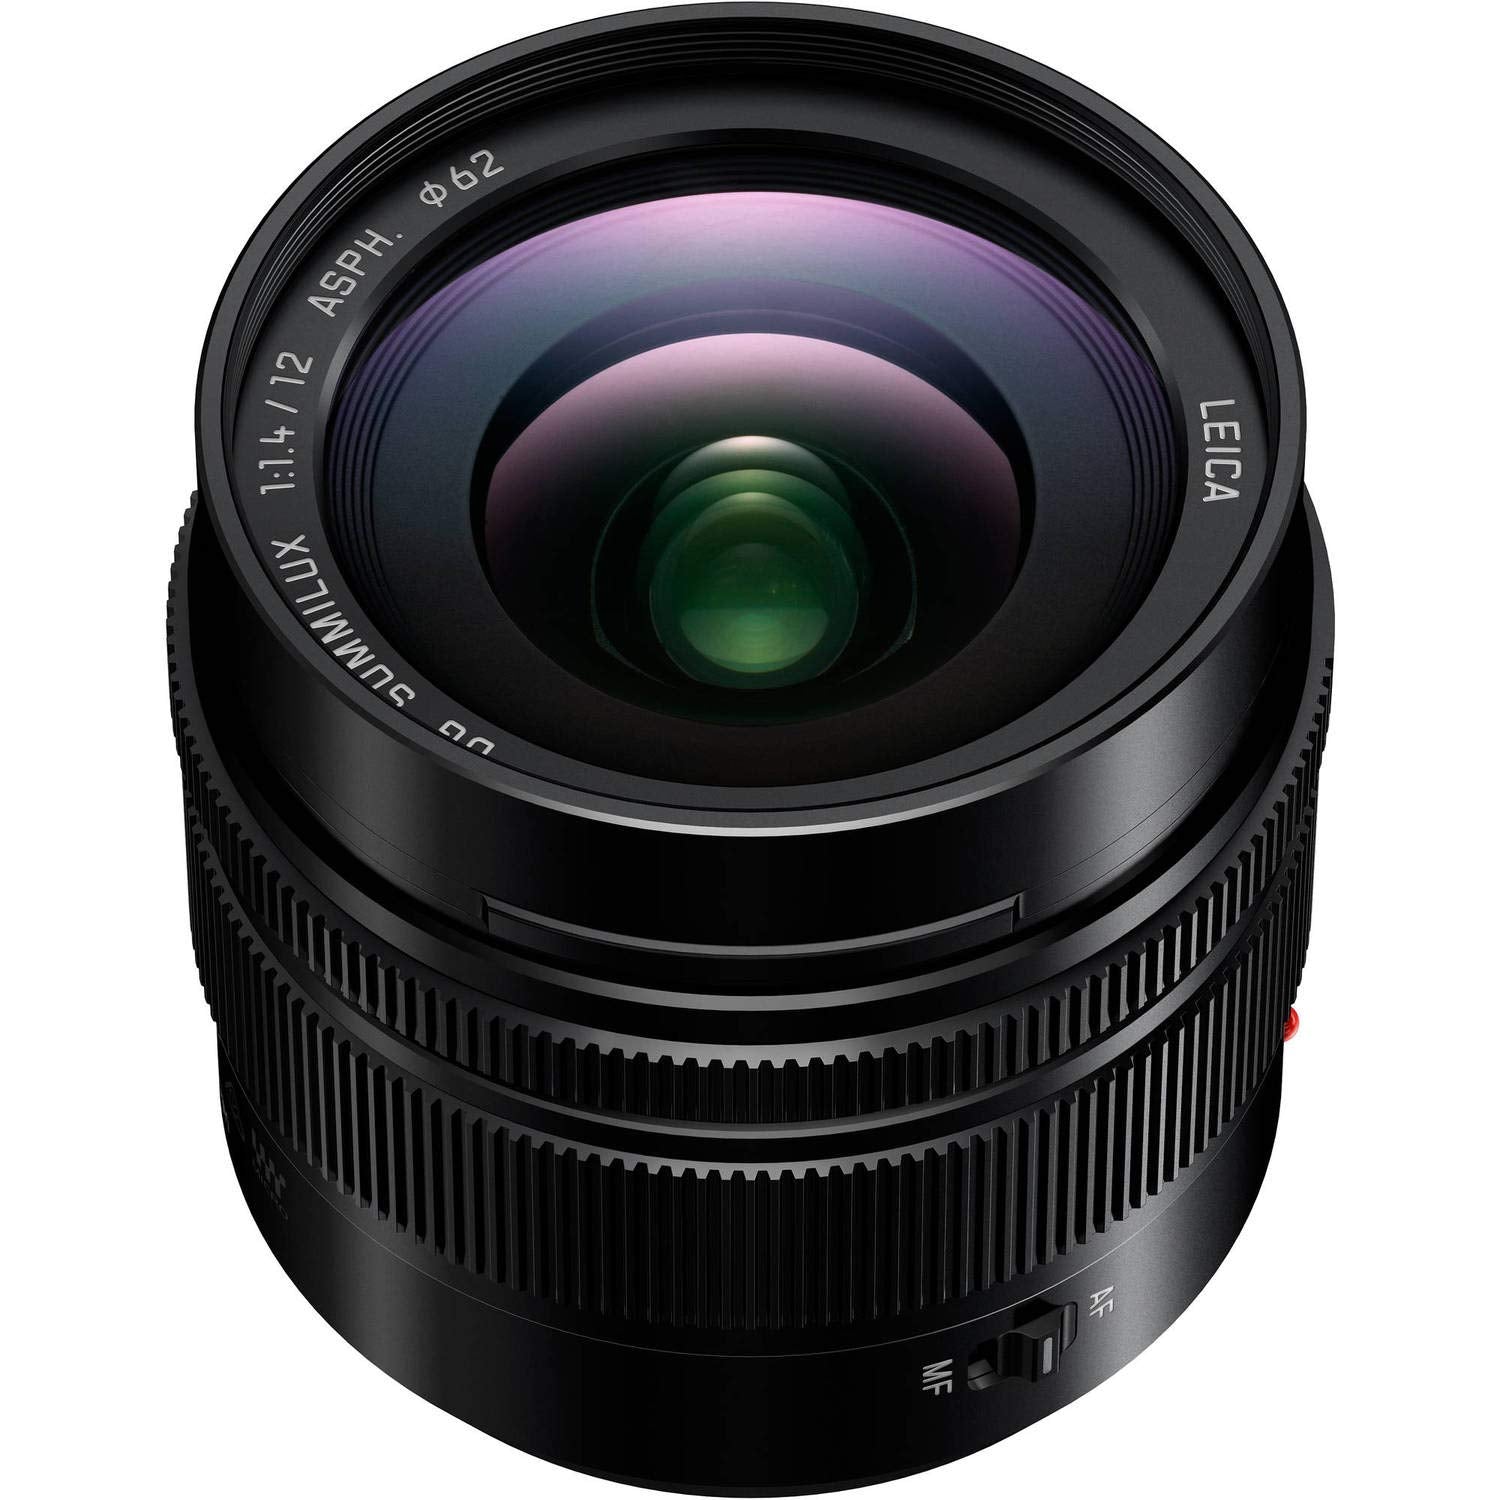 Panasonic Leica DG Summilux 12mm f/1.4 ASPH. Lens with Filter Kit, Lens Case and Cleaning Kit